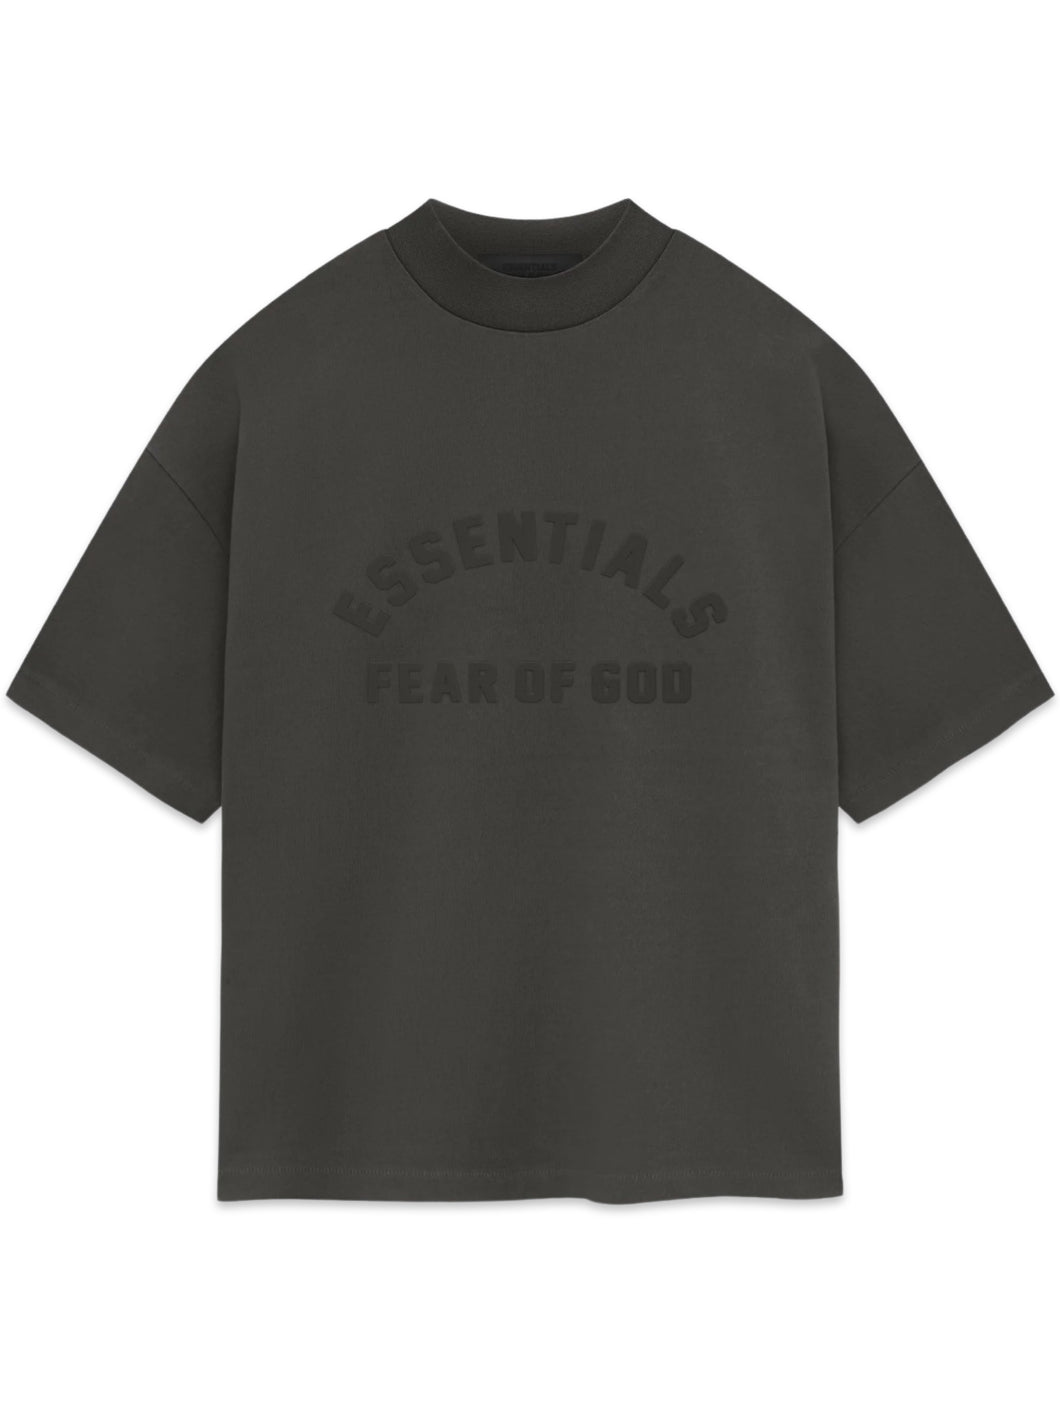 Essentials Fear of God FW24 Heavy Jersey Short Sleeve T-Shirt in Ink